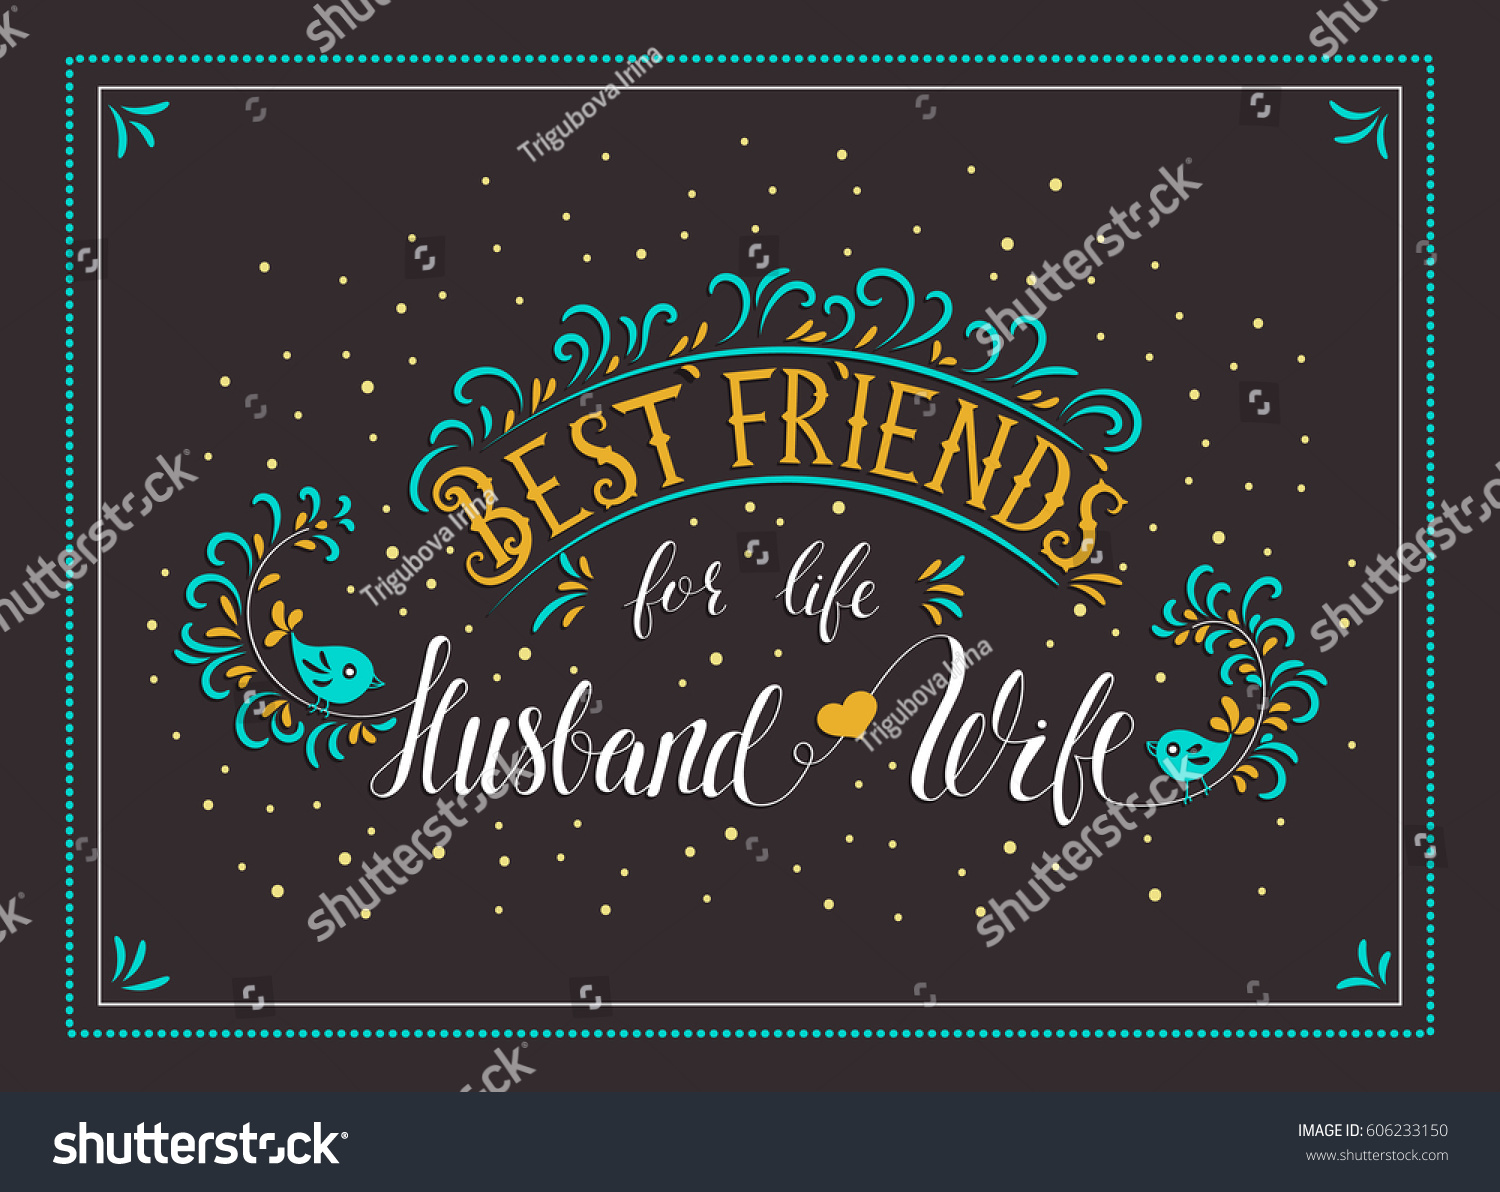 Handwriting vector lettering quote Best friends for life husband and wife Married life